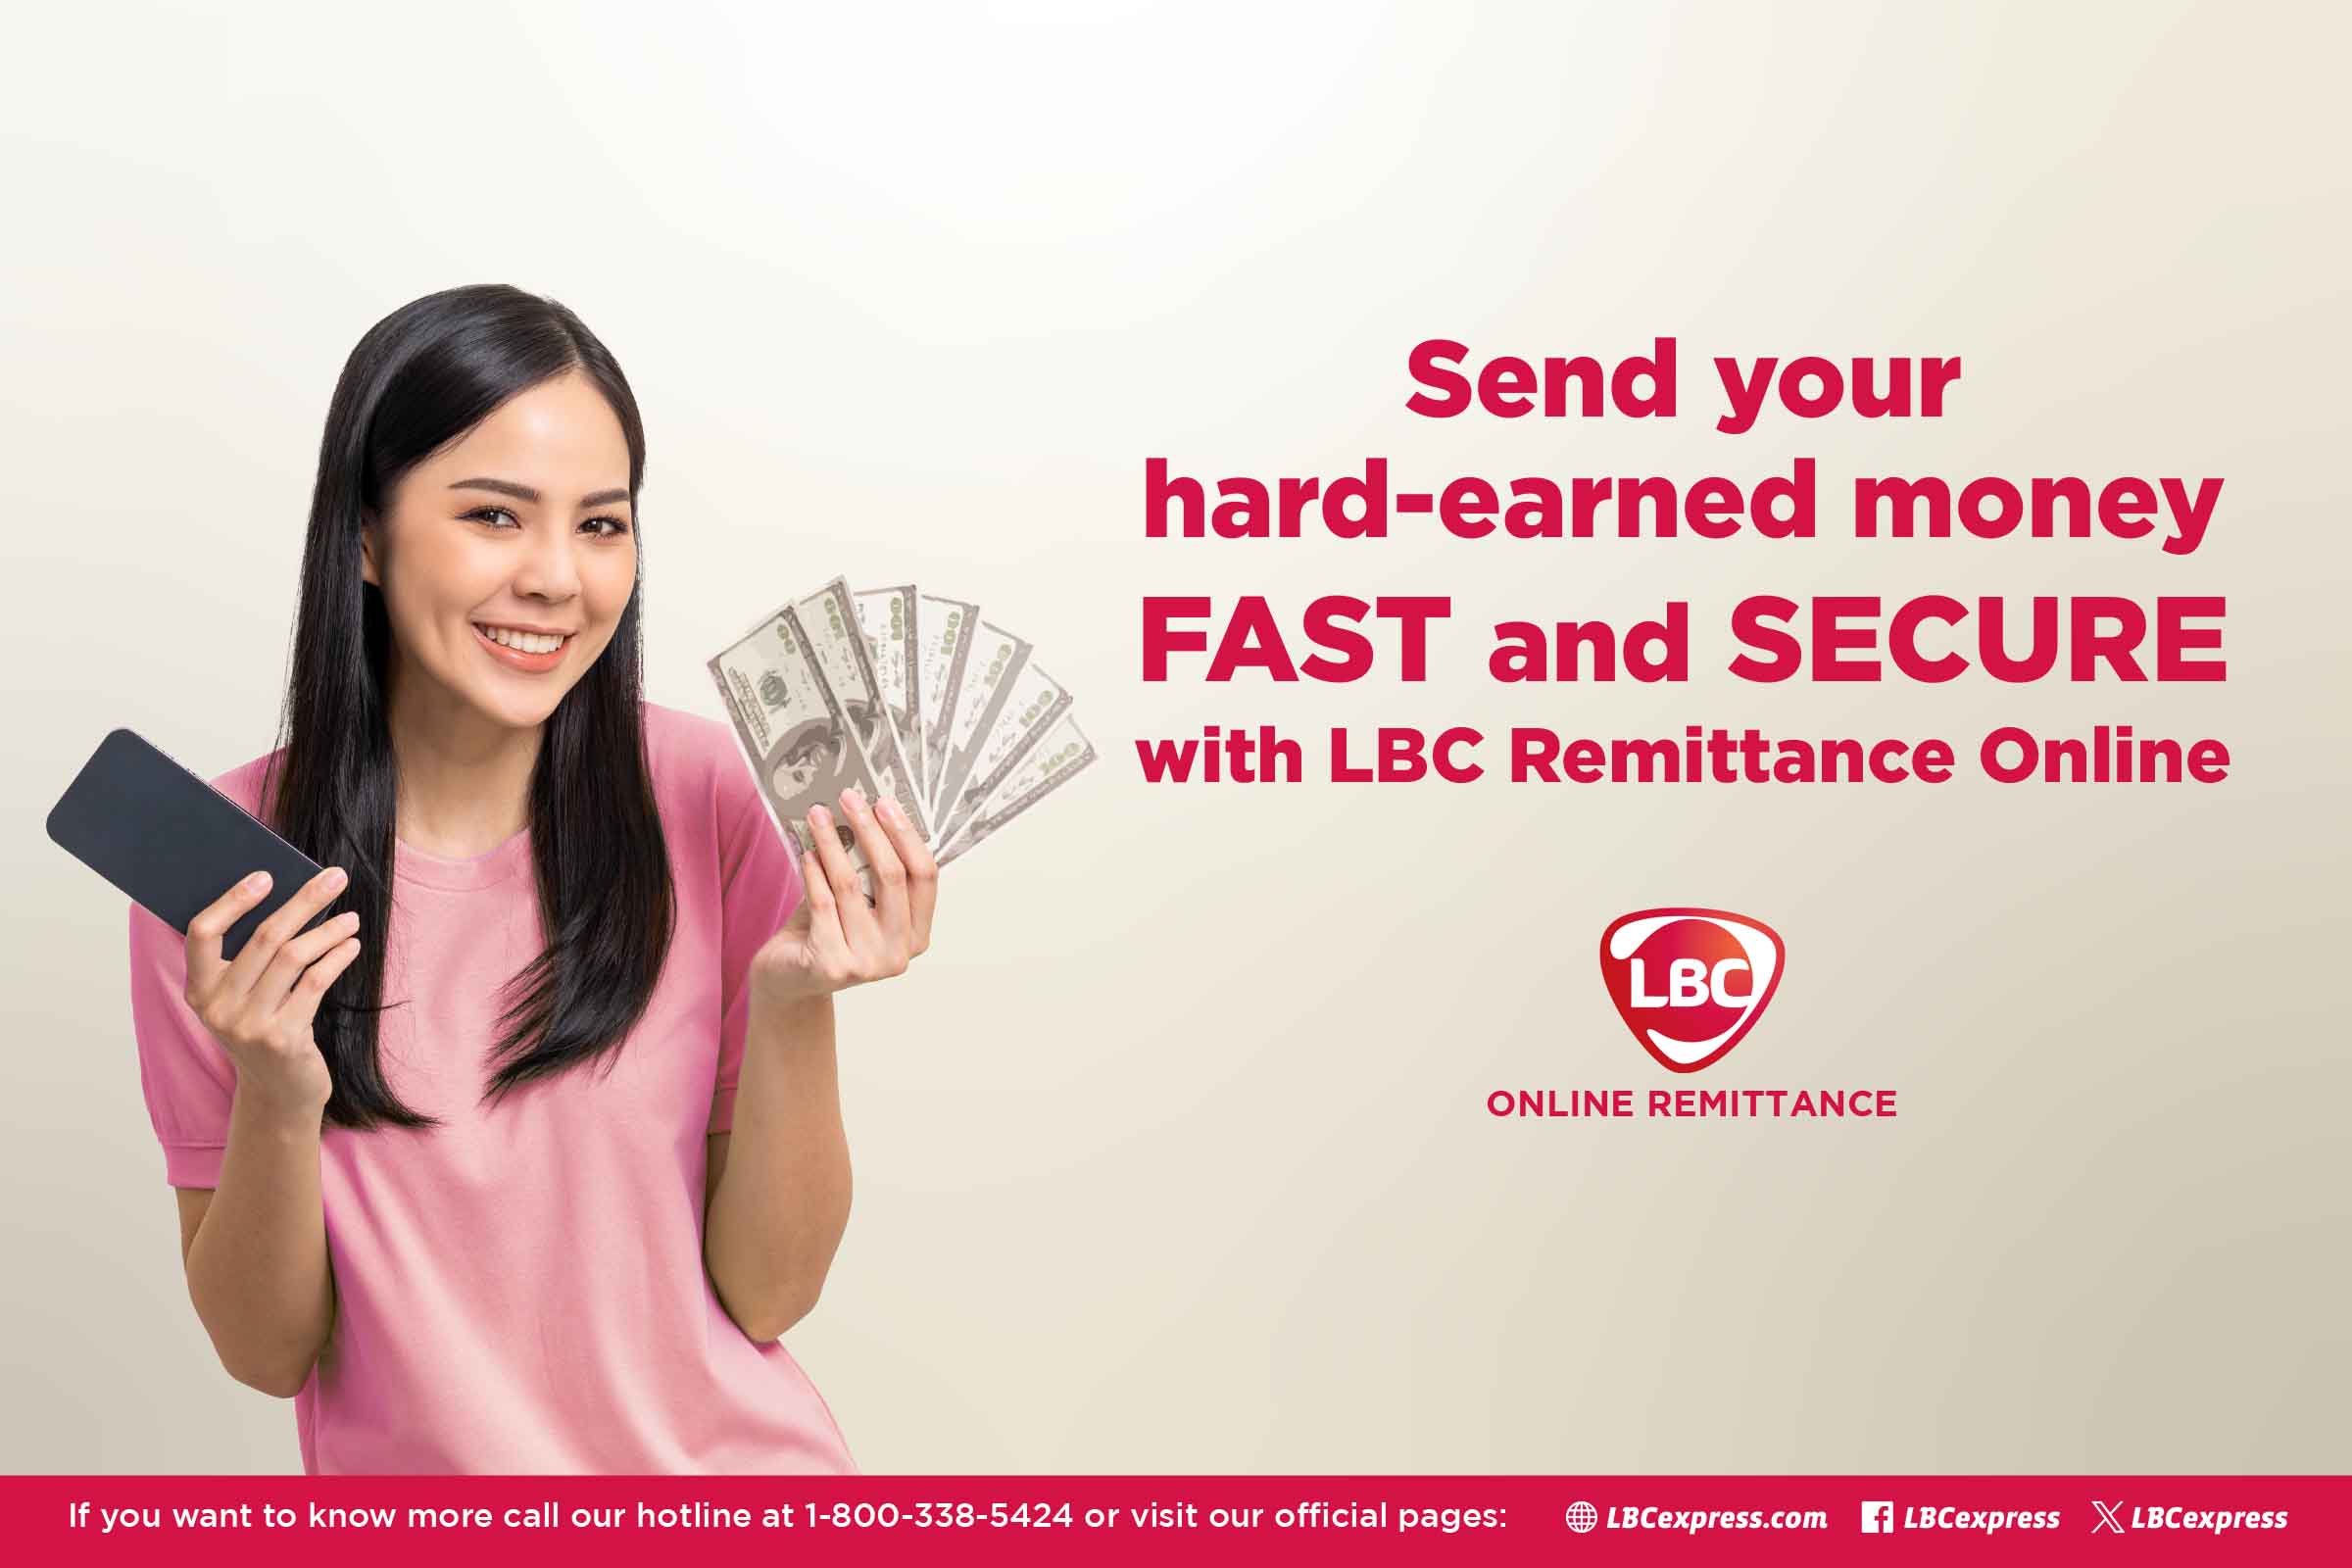 Send your hard-earned money FAST and SECURE with LBC Remittance Online